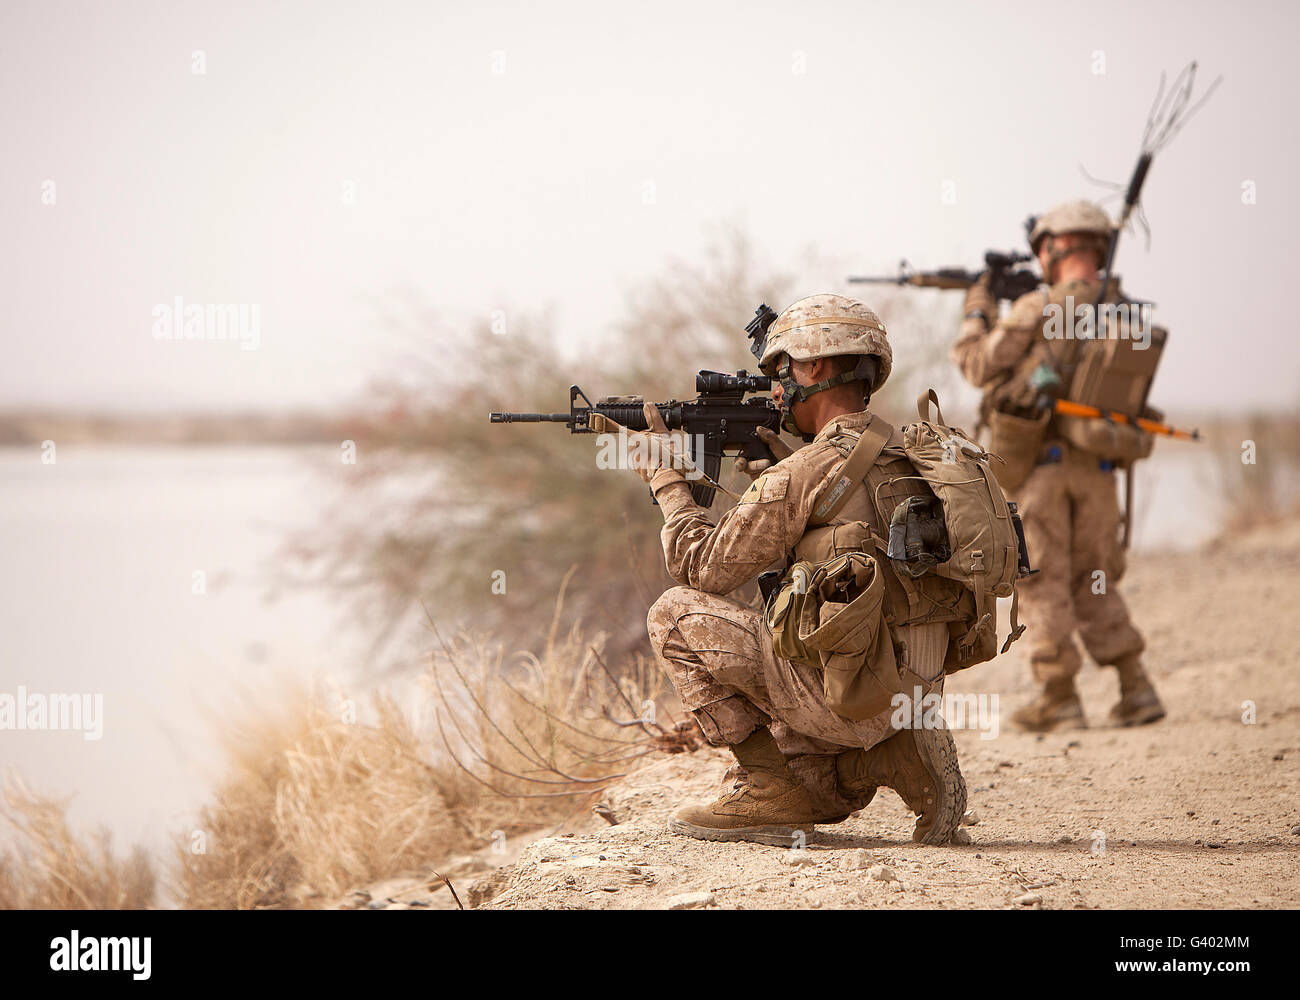 U.S. Marines sight in their weapons while on patrol in Afghanistan. Stock Photo